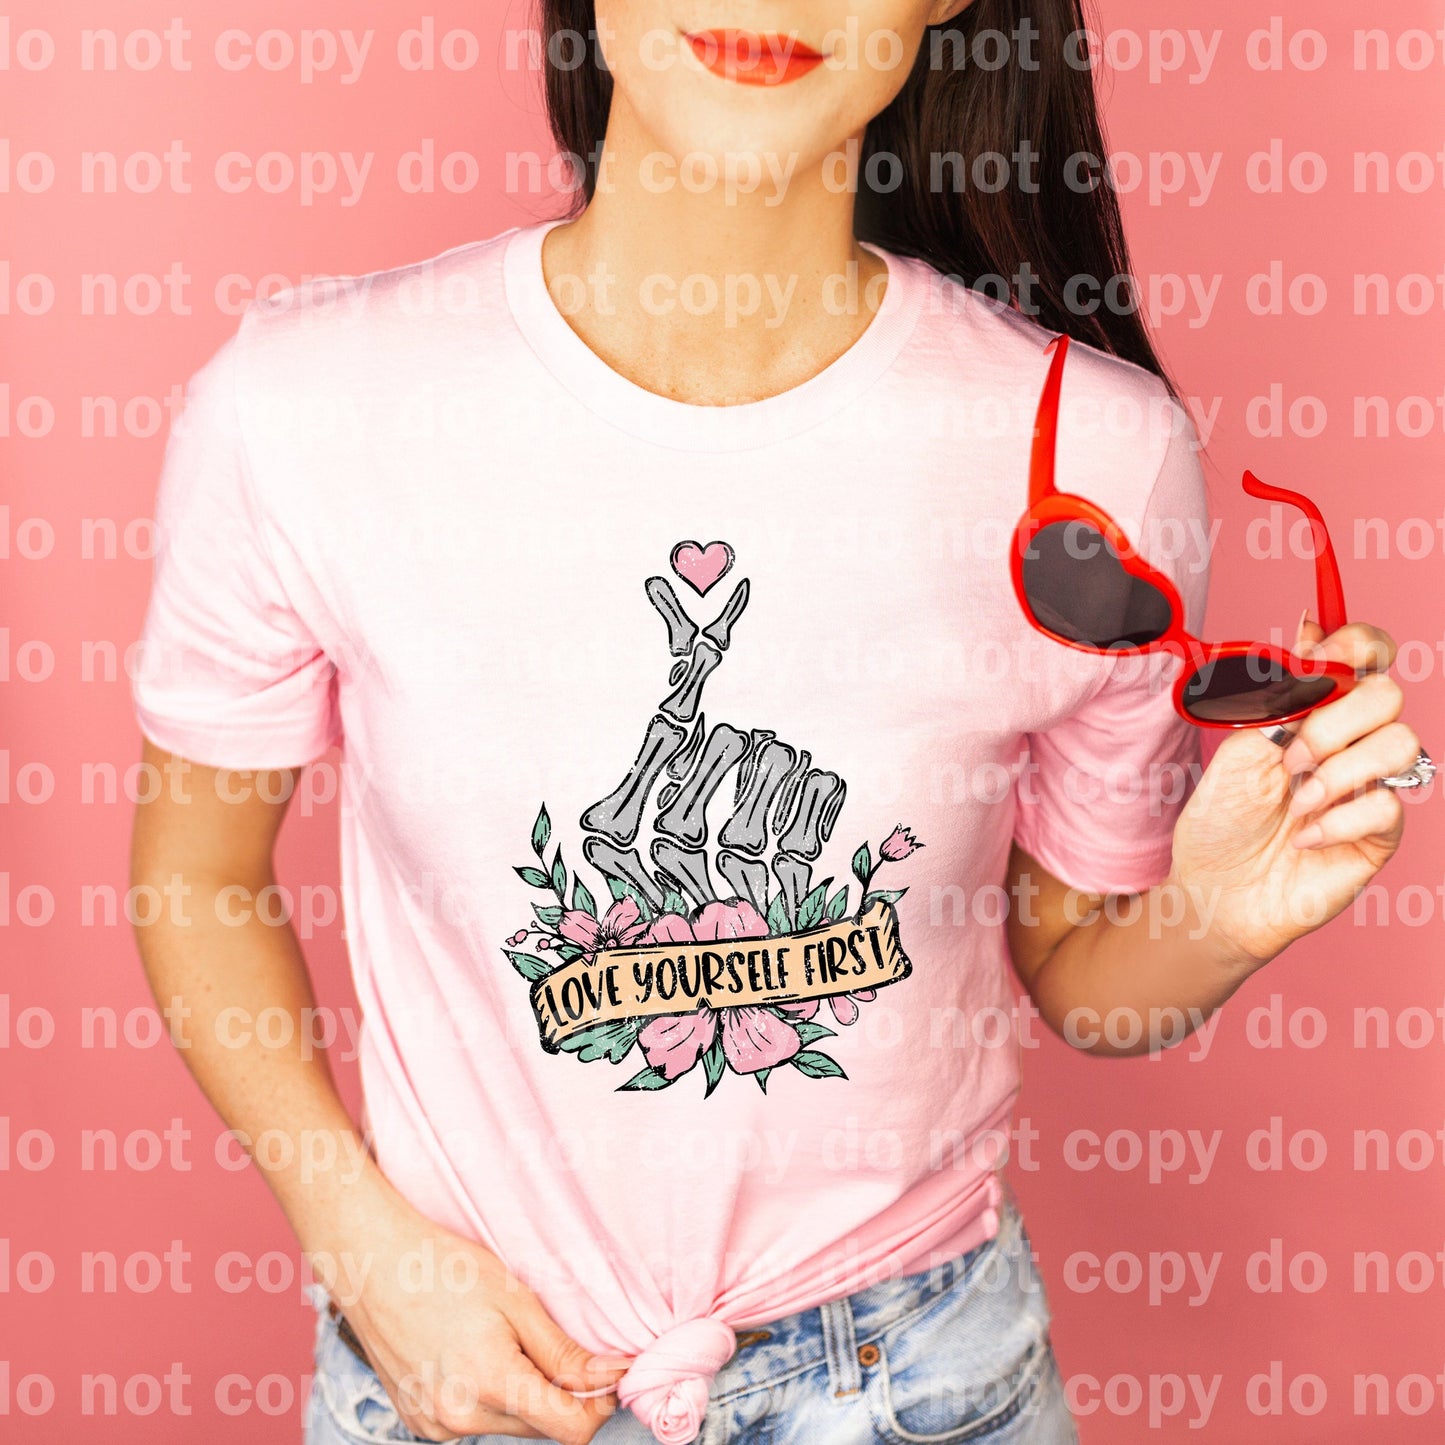 Love Yourself First Heart Finger Skellie Distressed Full Color/One Color with Pocket Option Dream Print or Sublimation Print